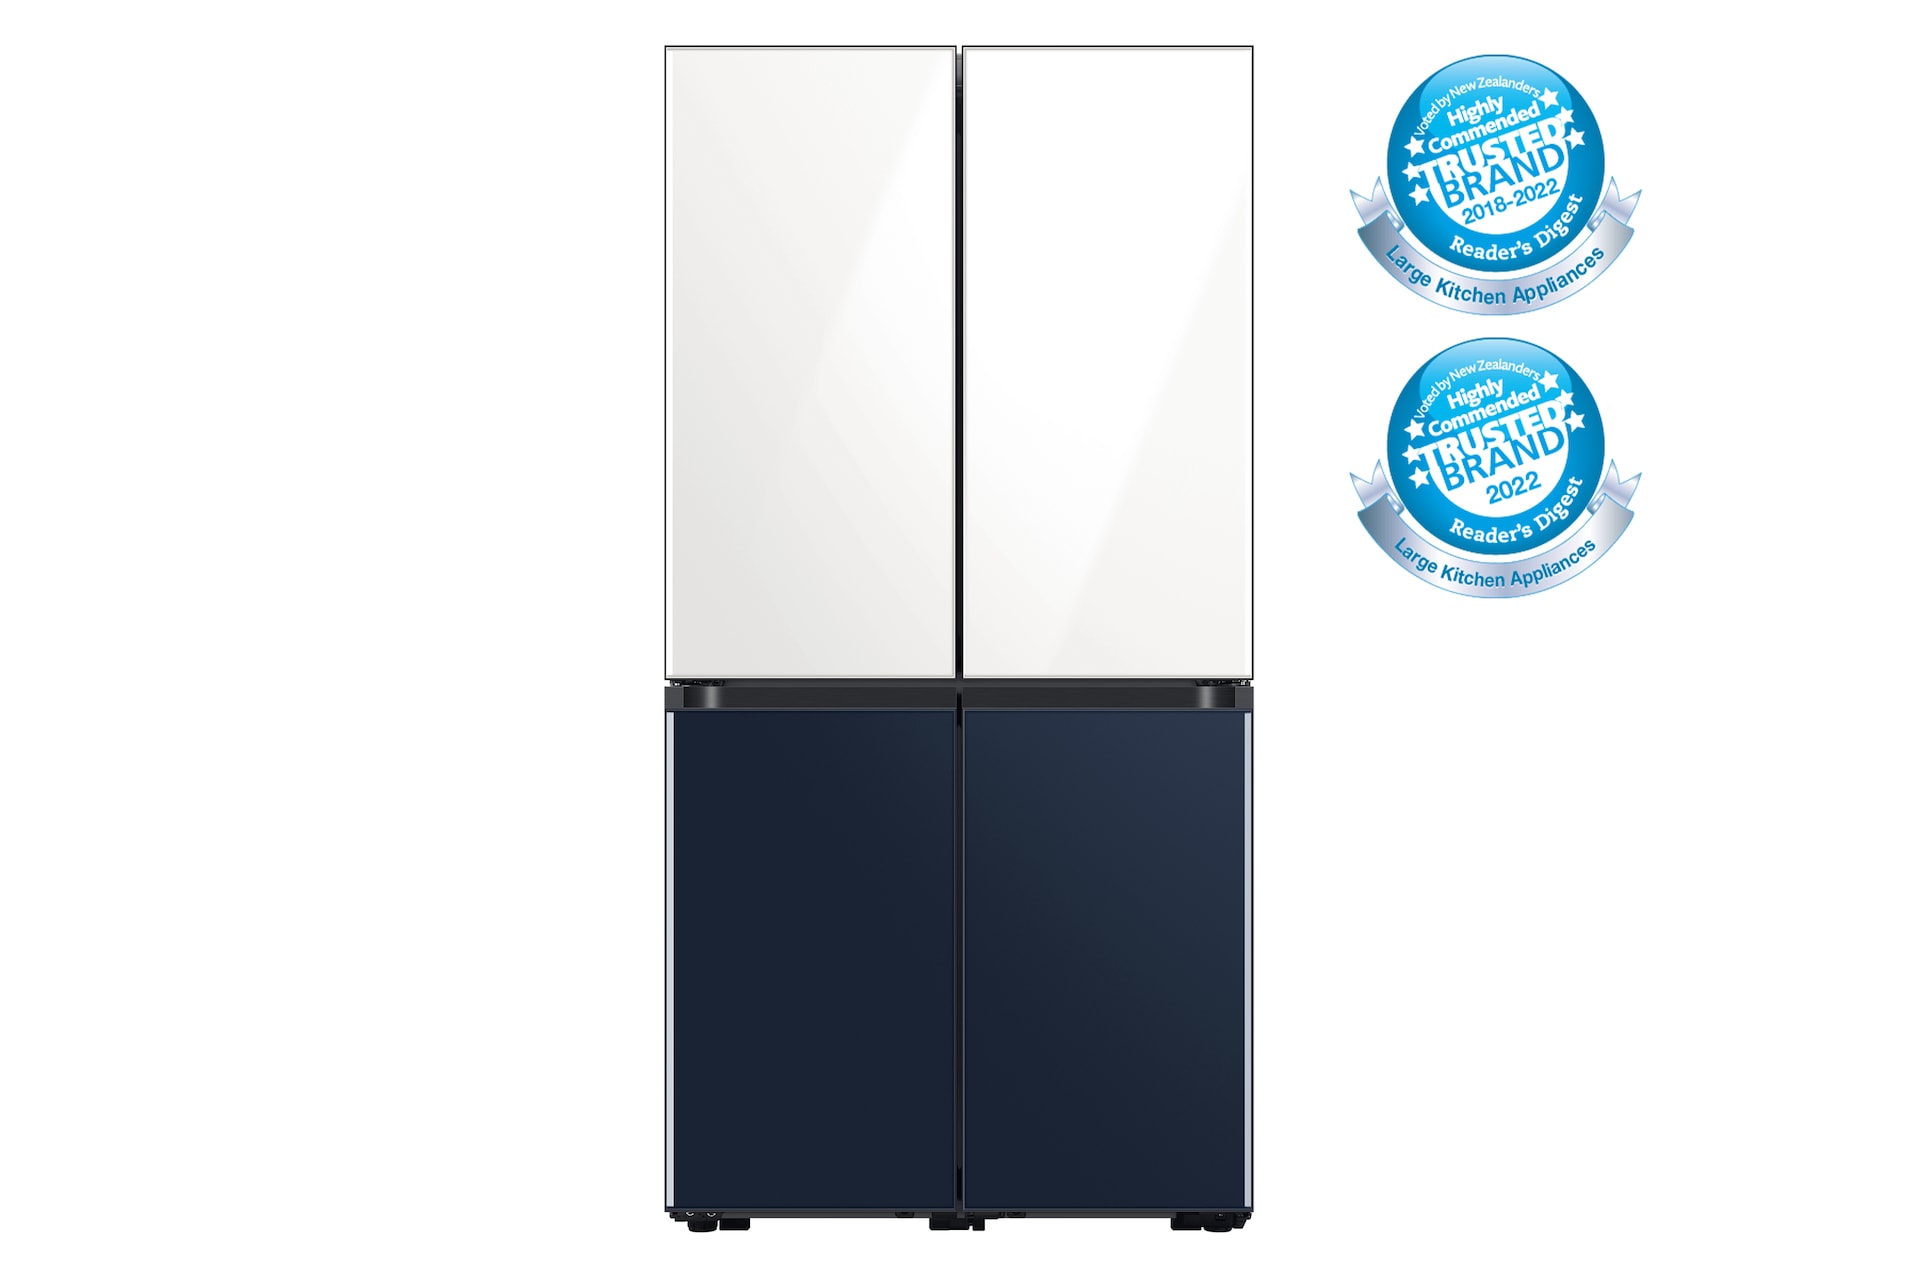 Front view of the Samsung 596L French Door Refrigerator (SRFX9500N) in Blue & White Colour.